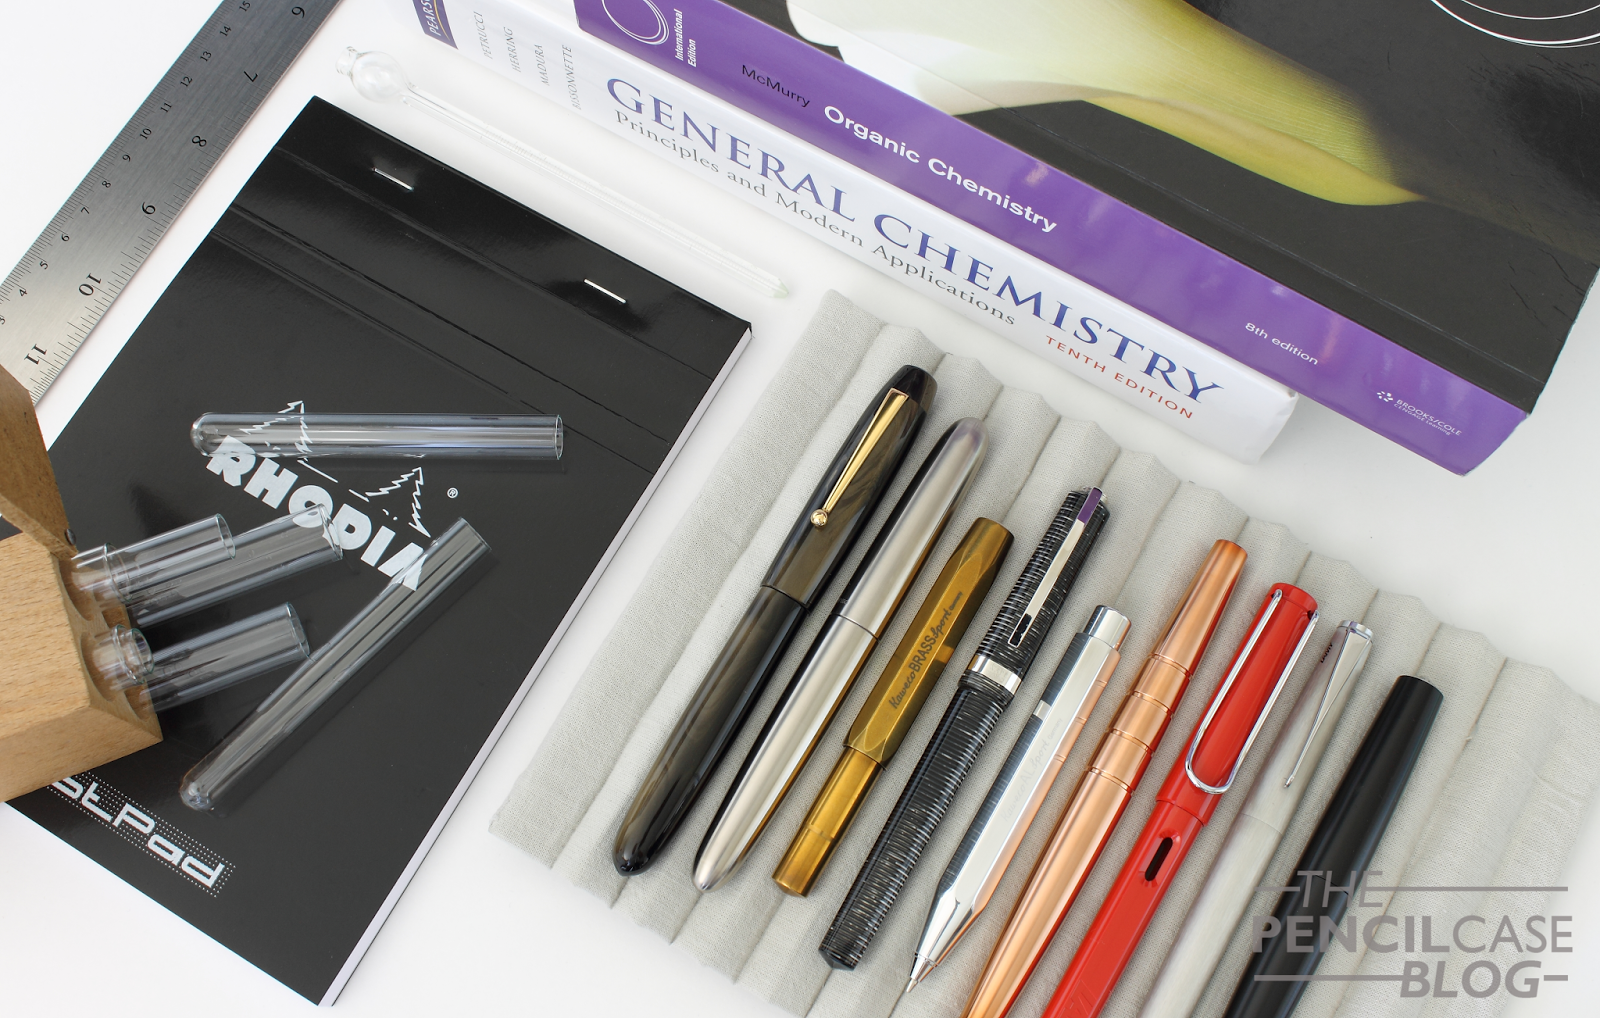 PENS & CHEMISTRY - MATERIALS, The Pencilcase Blog